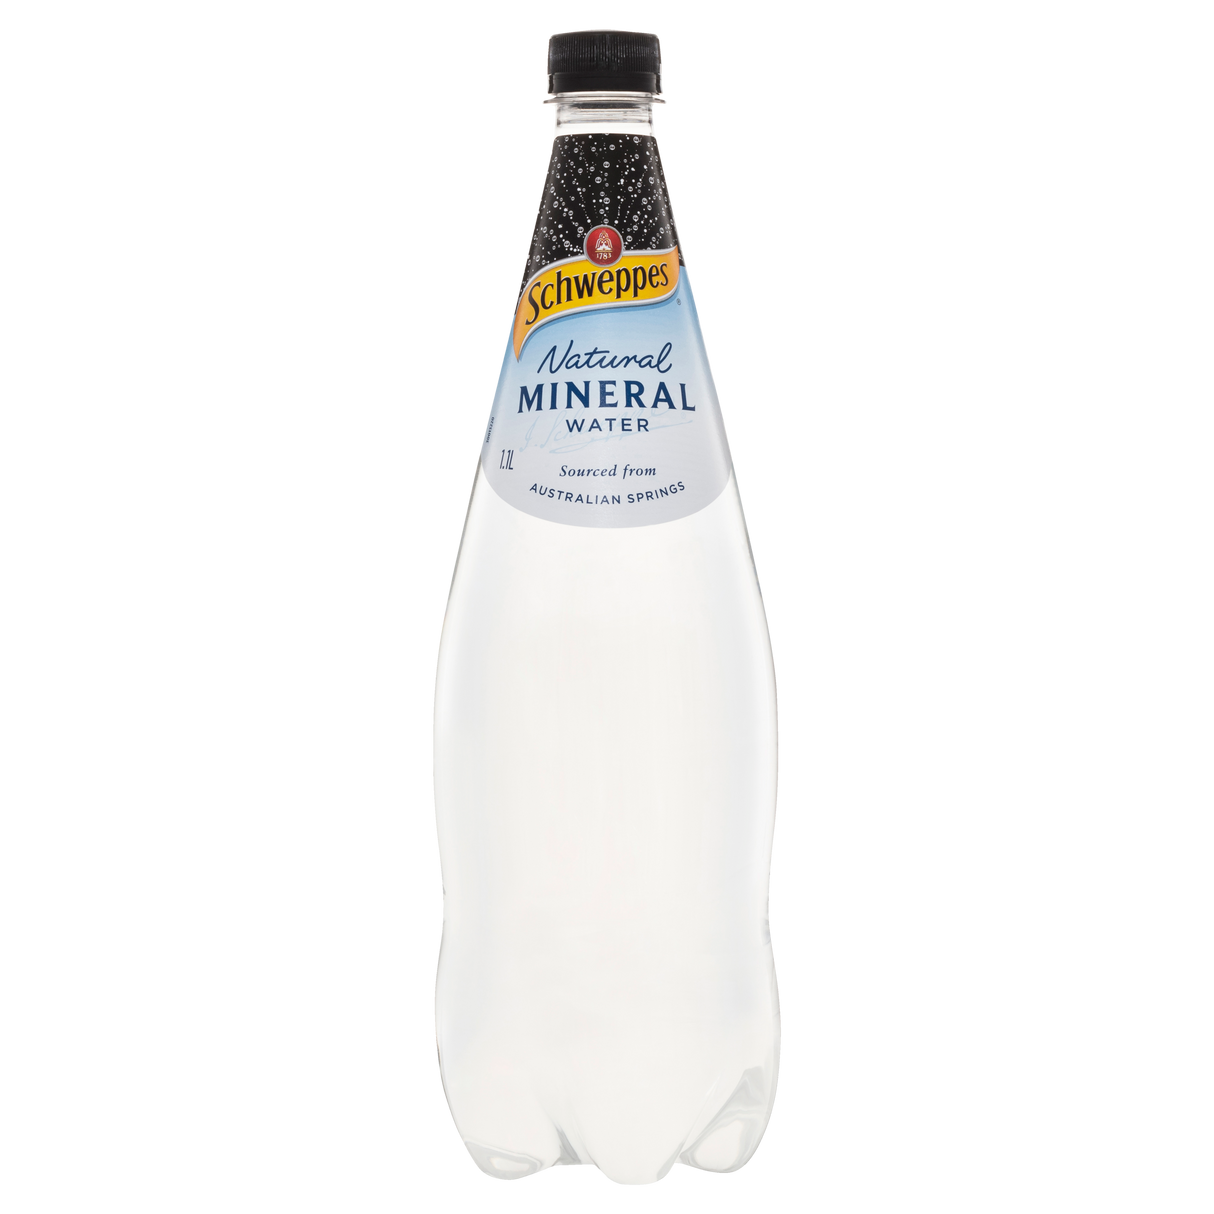 Schweppes Natural Mineral Water 1.1l